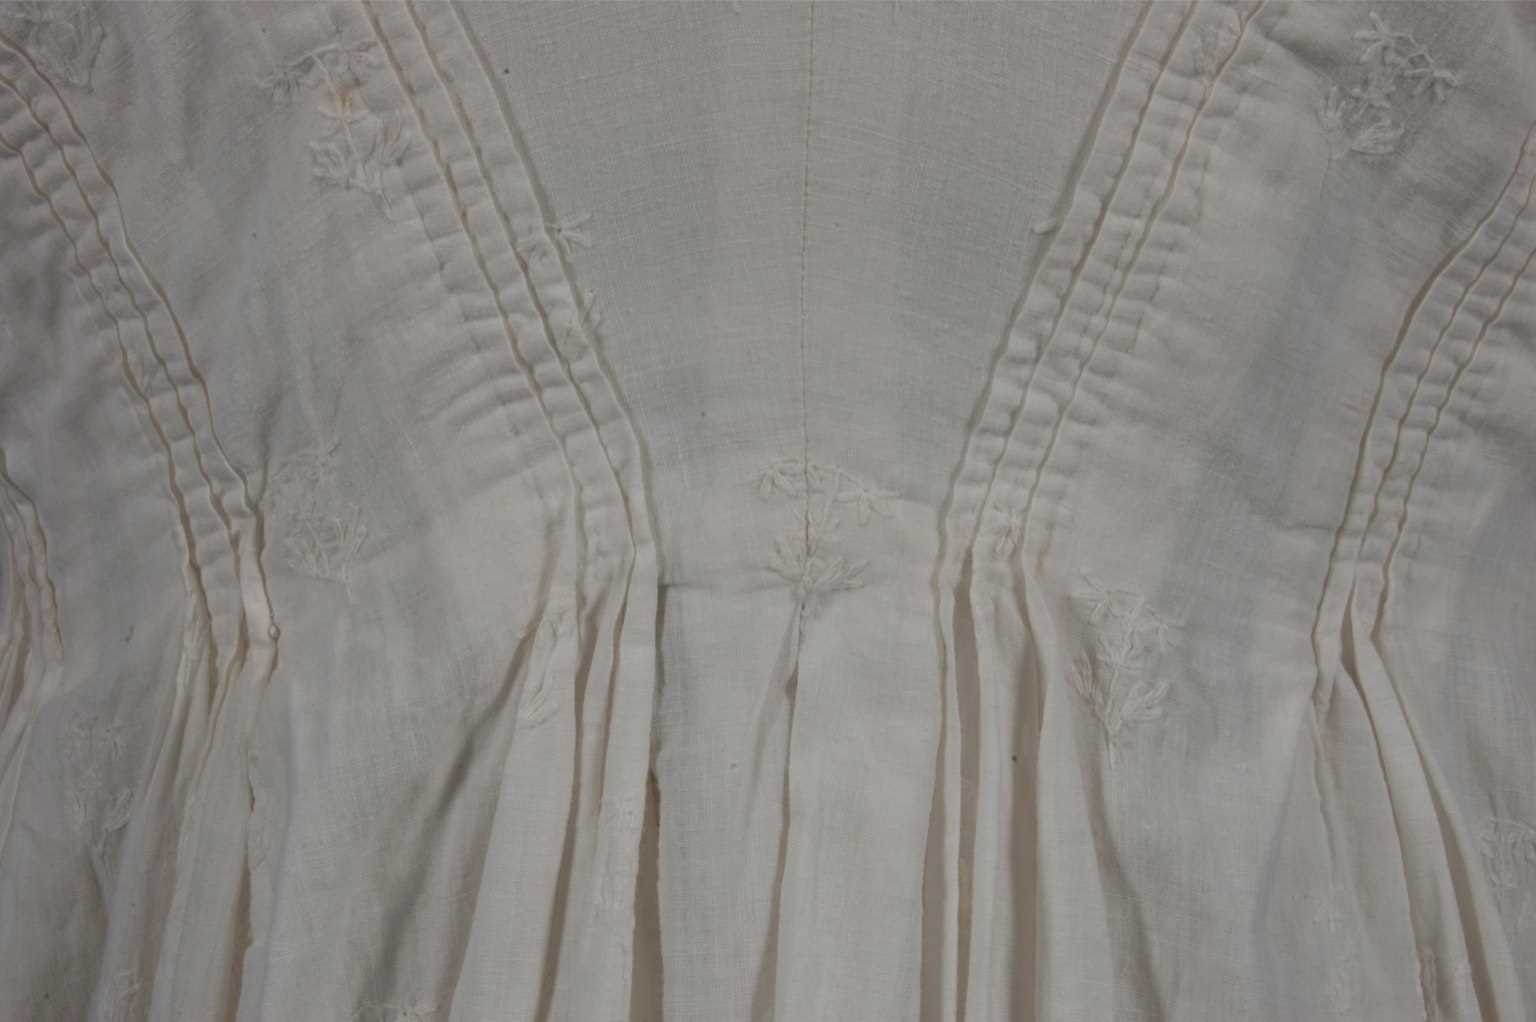 Lot 44 - A whitework embroidered open robe, circa 1785-